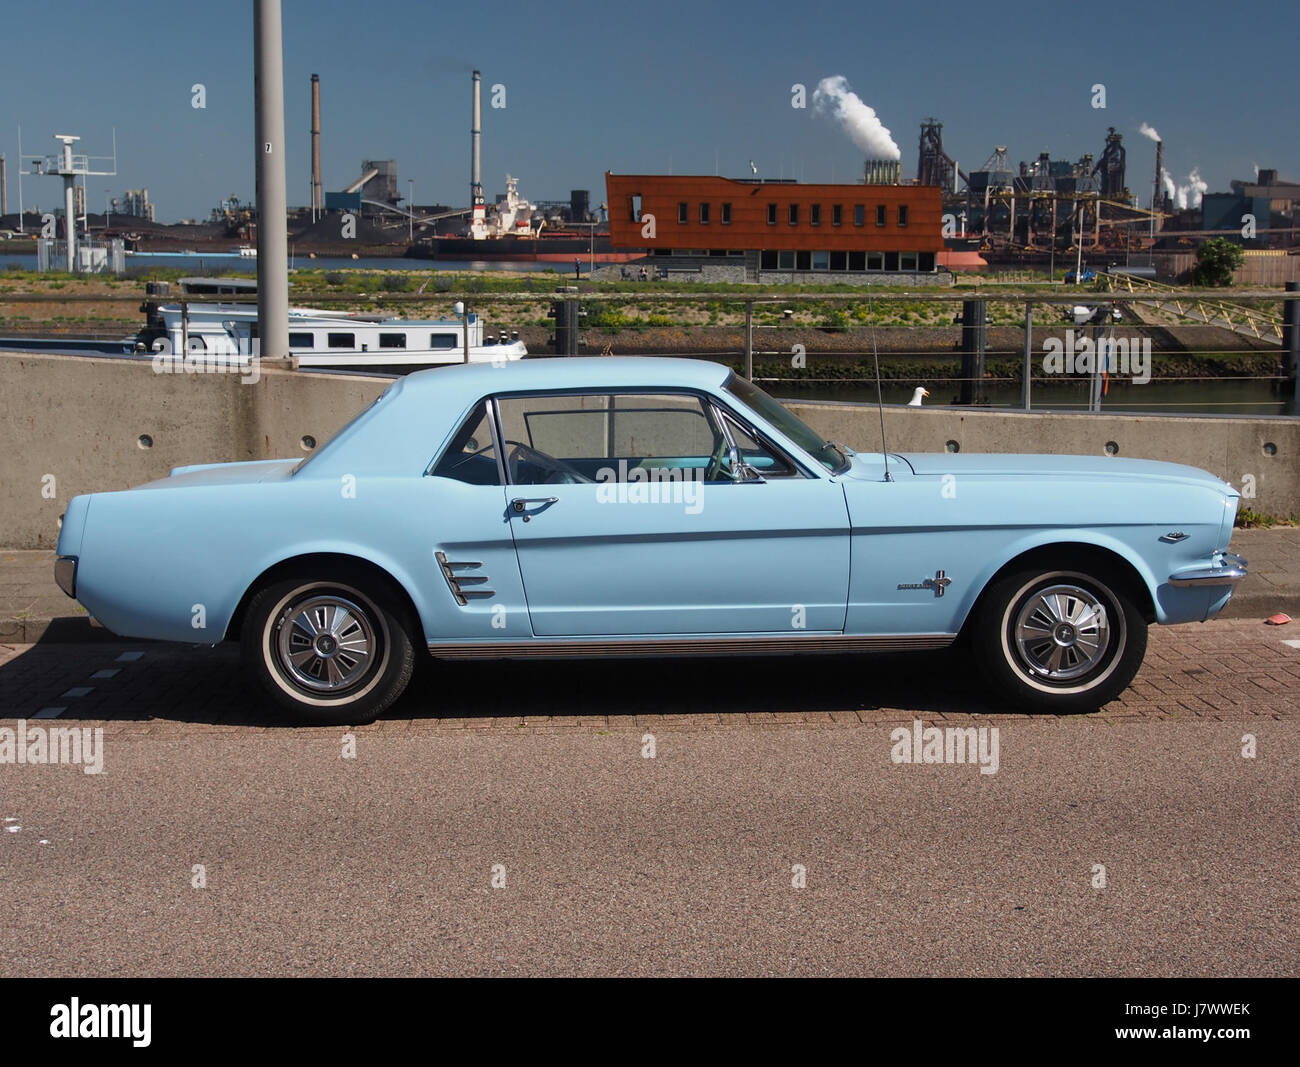 1966 Ford Mustang light blue, pic3 Stock Photo